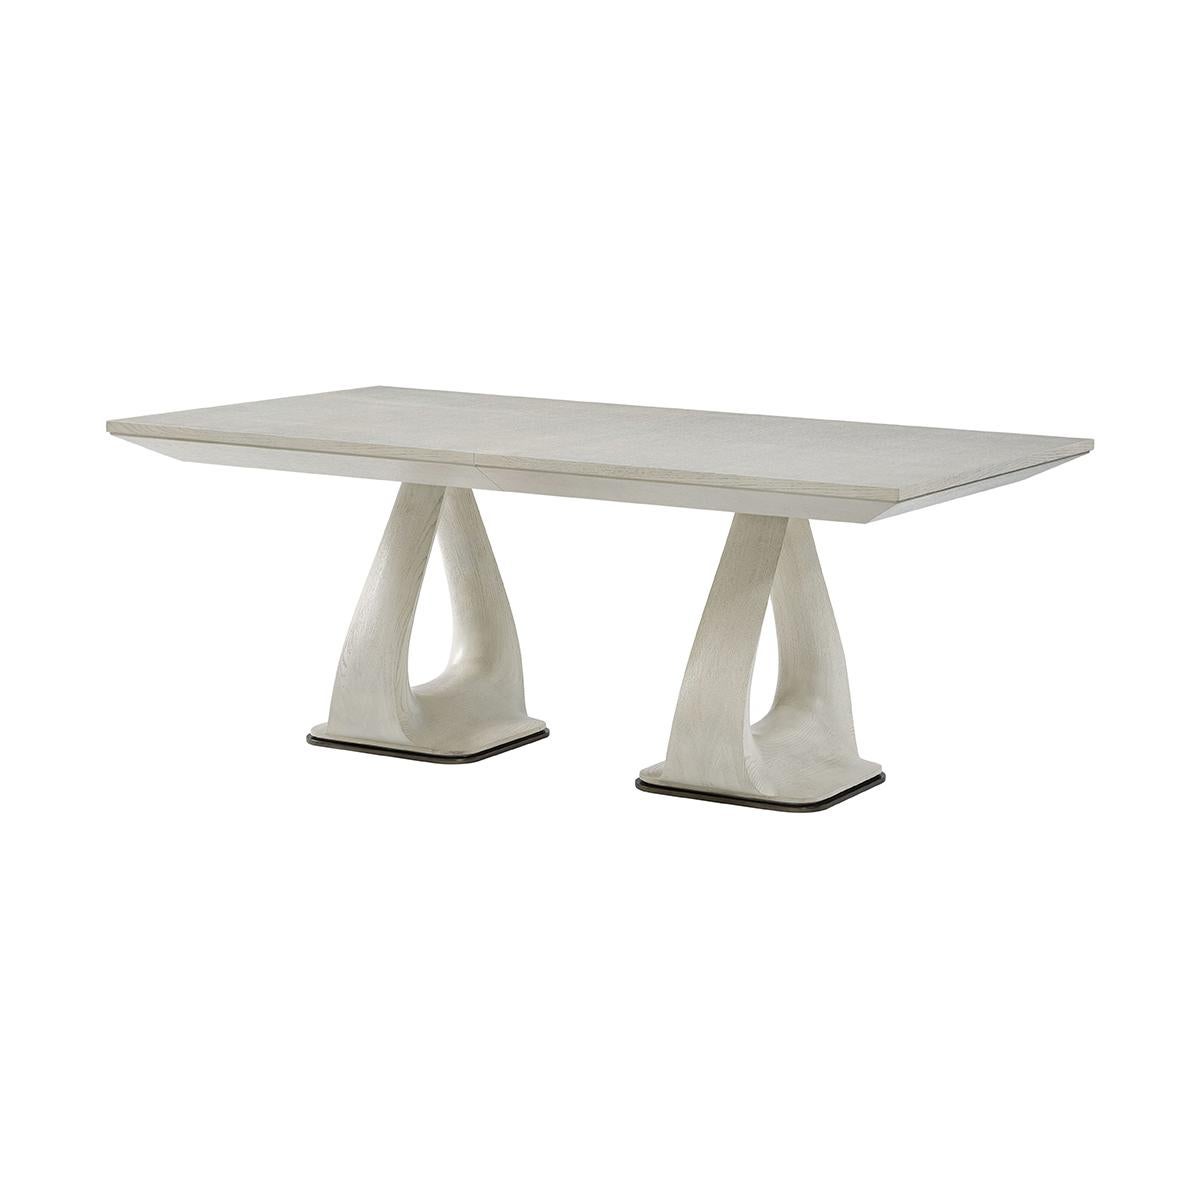 Masterfully crafted from oak, and finished in opal white finish, this table showcases the natural beauty of the wood through its gentle, soft lines and a knife-edge top, creating a sophisticated and inviting atmosphere.

Featuring a unique shaped